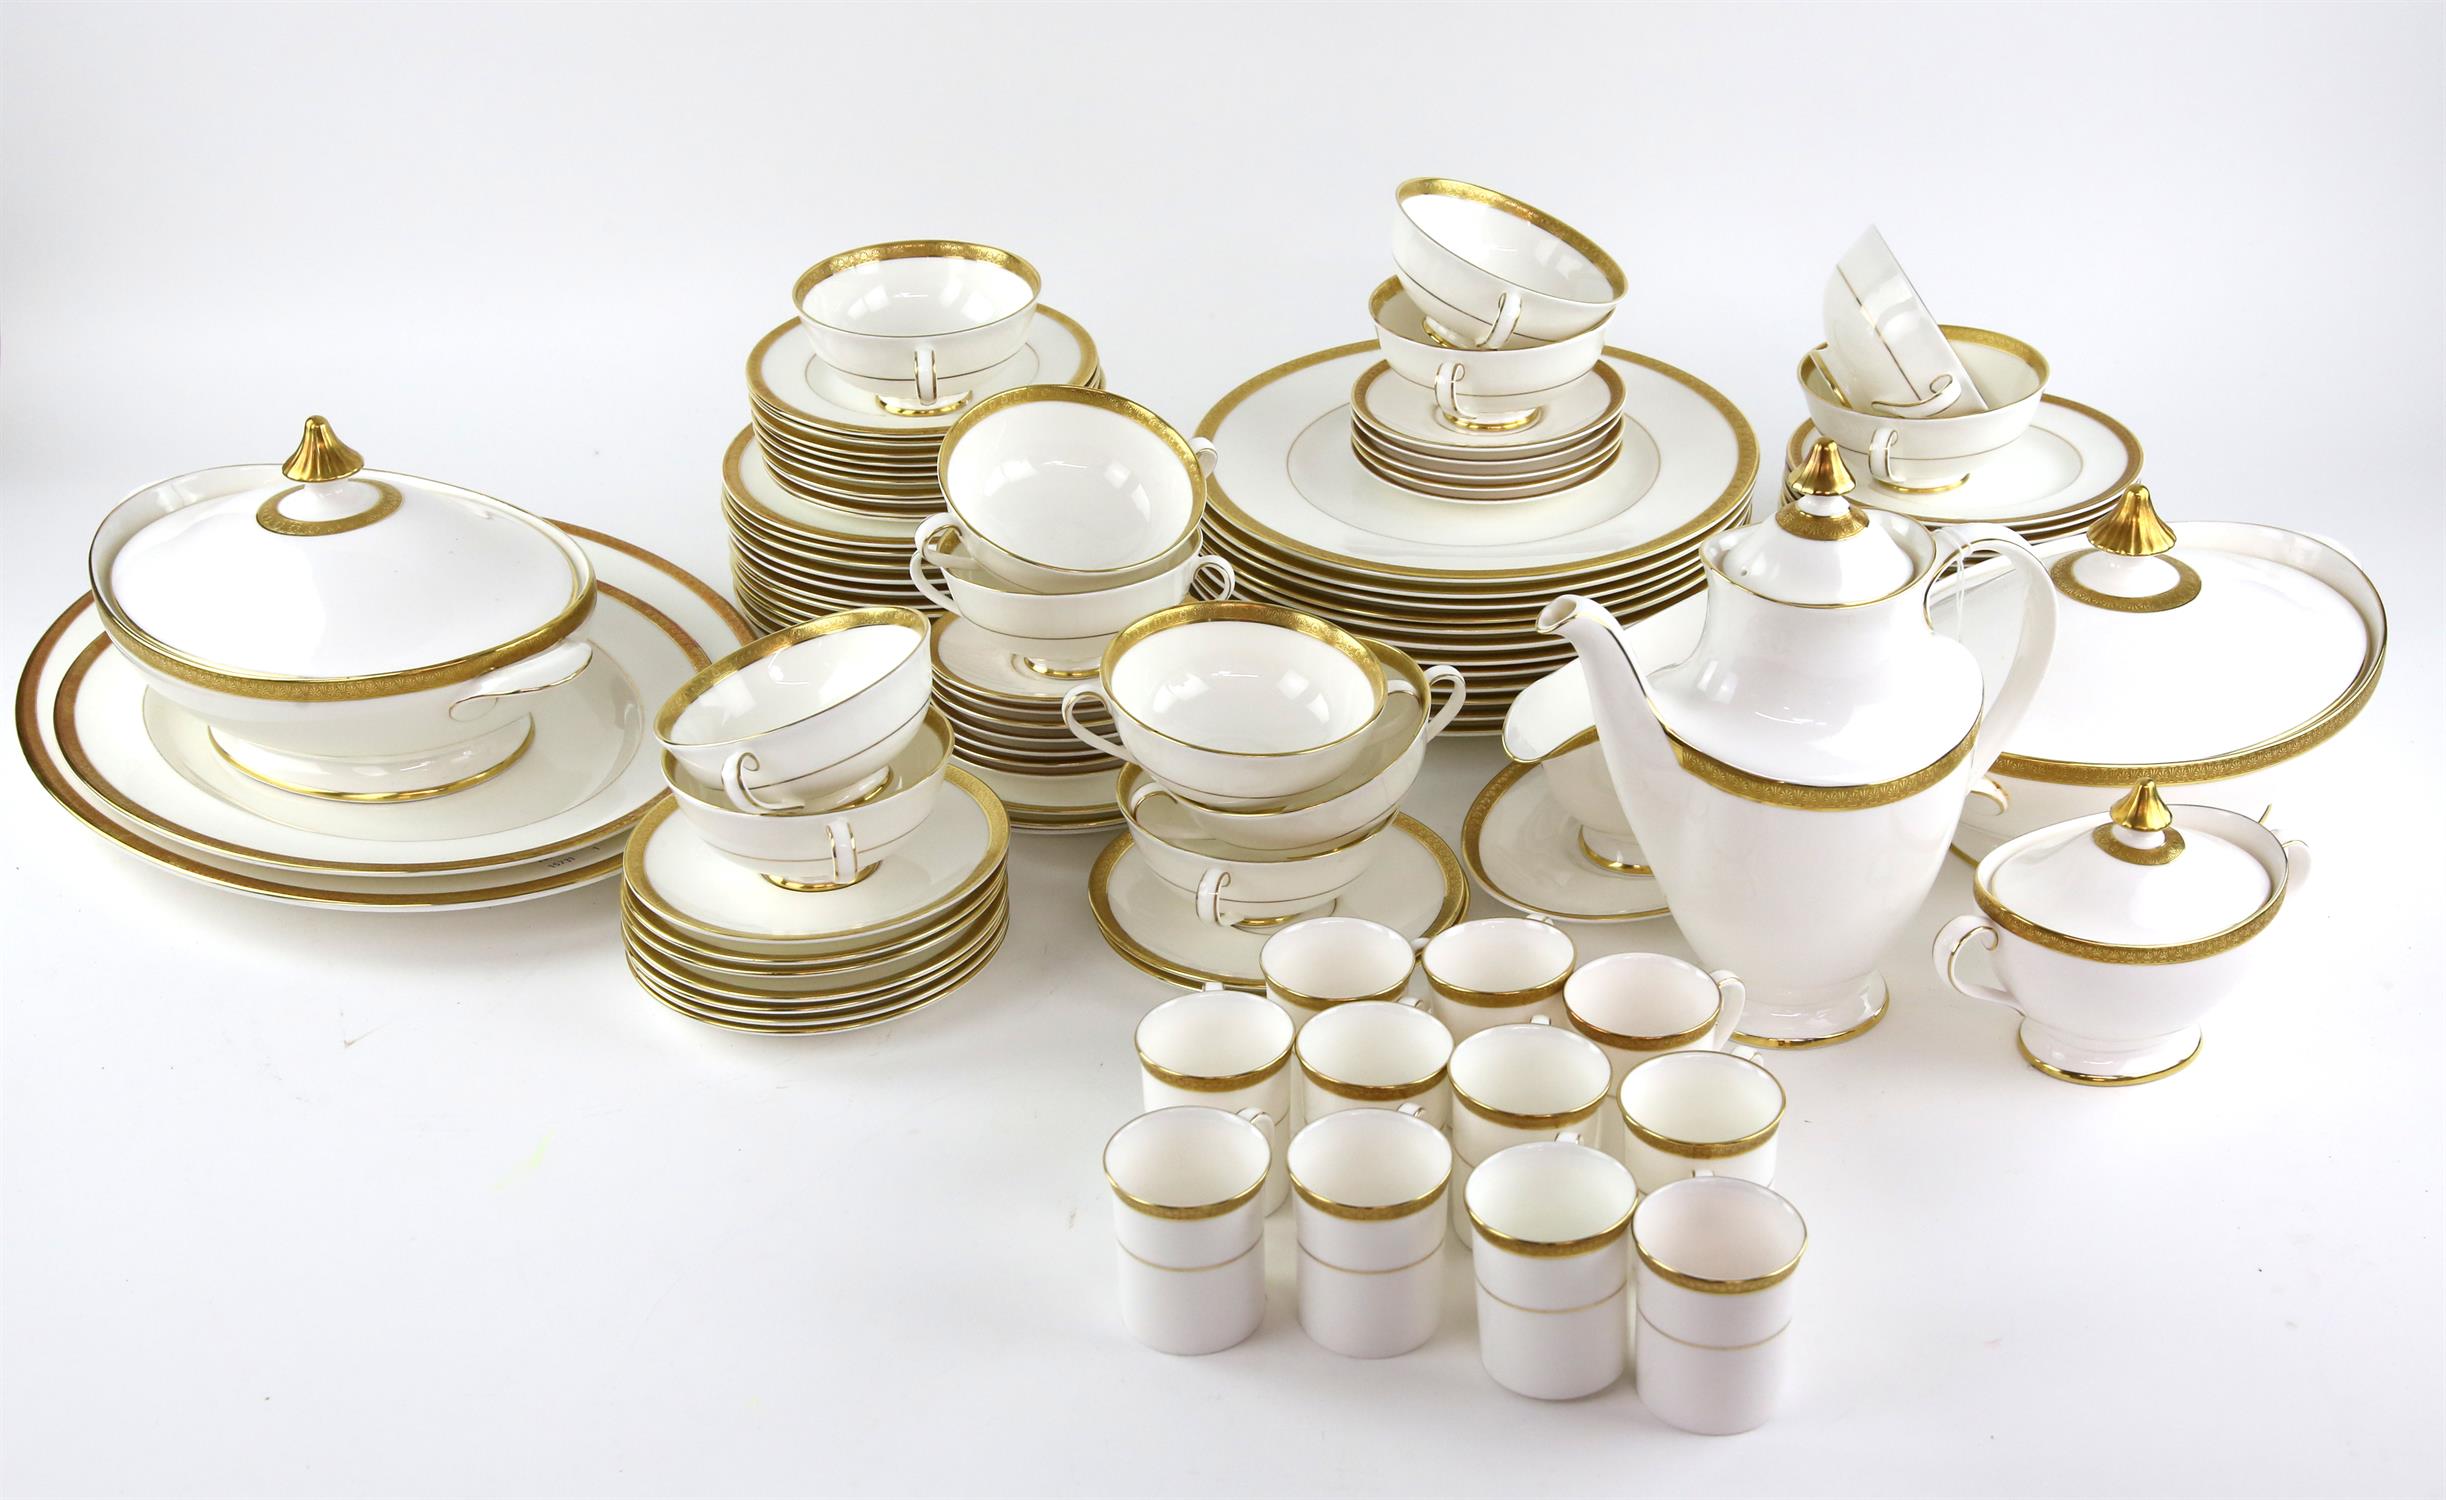 Royal Doulton 'Royal Gold' dinner service, decorated with a gilt border and band on a white ground,